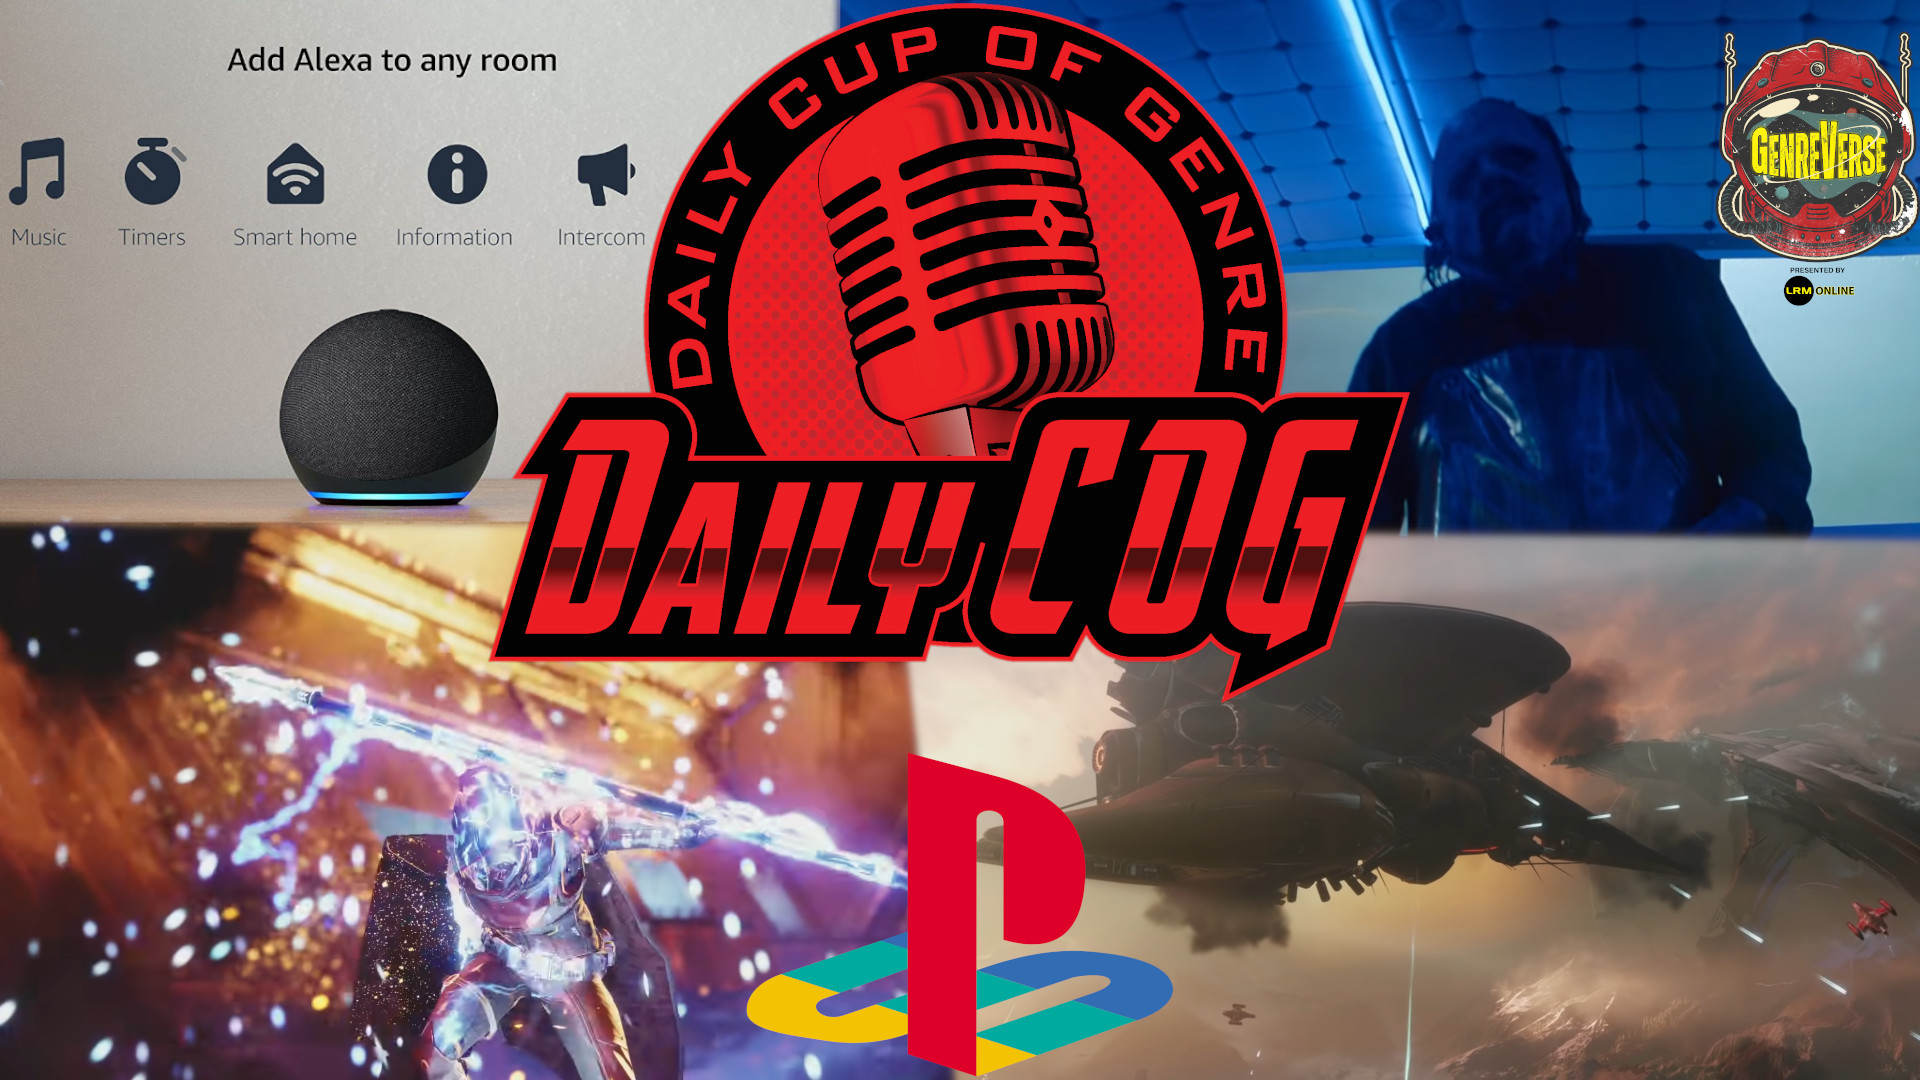 Sony Buys Bungie, Alexa Went Down & Connectivity Issues In Life, And Texas Chainsaw Massacre Trailer Reaction | Daily COG